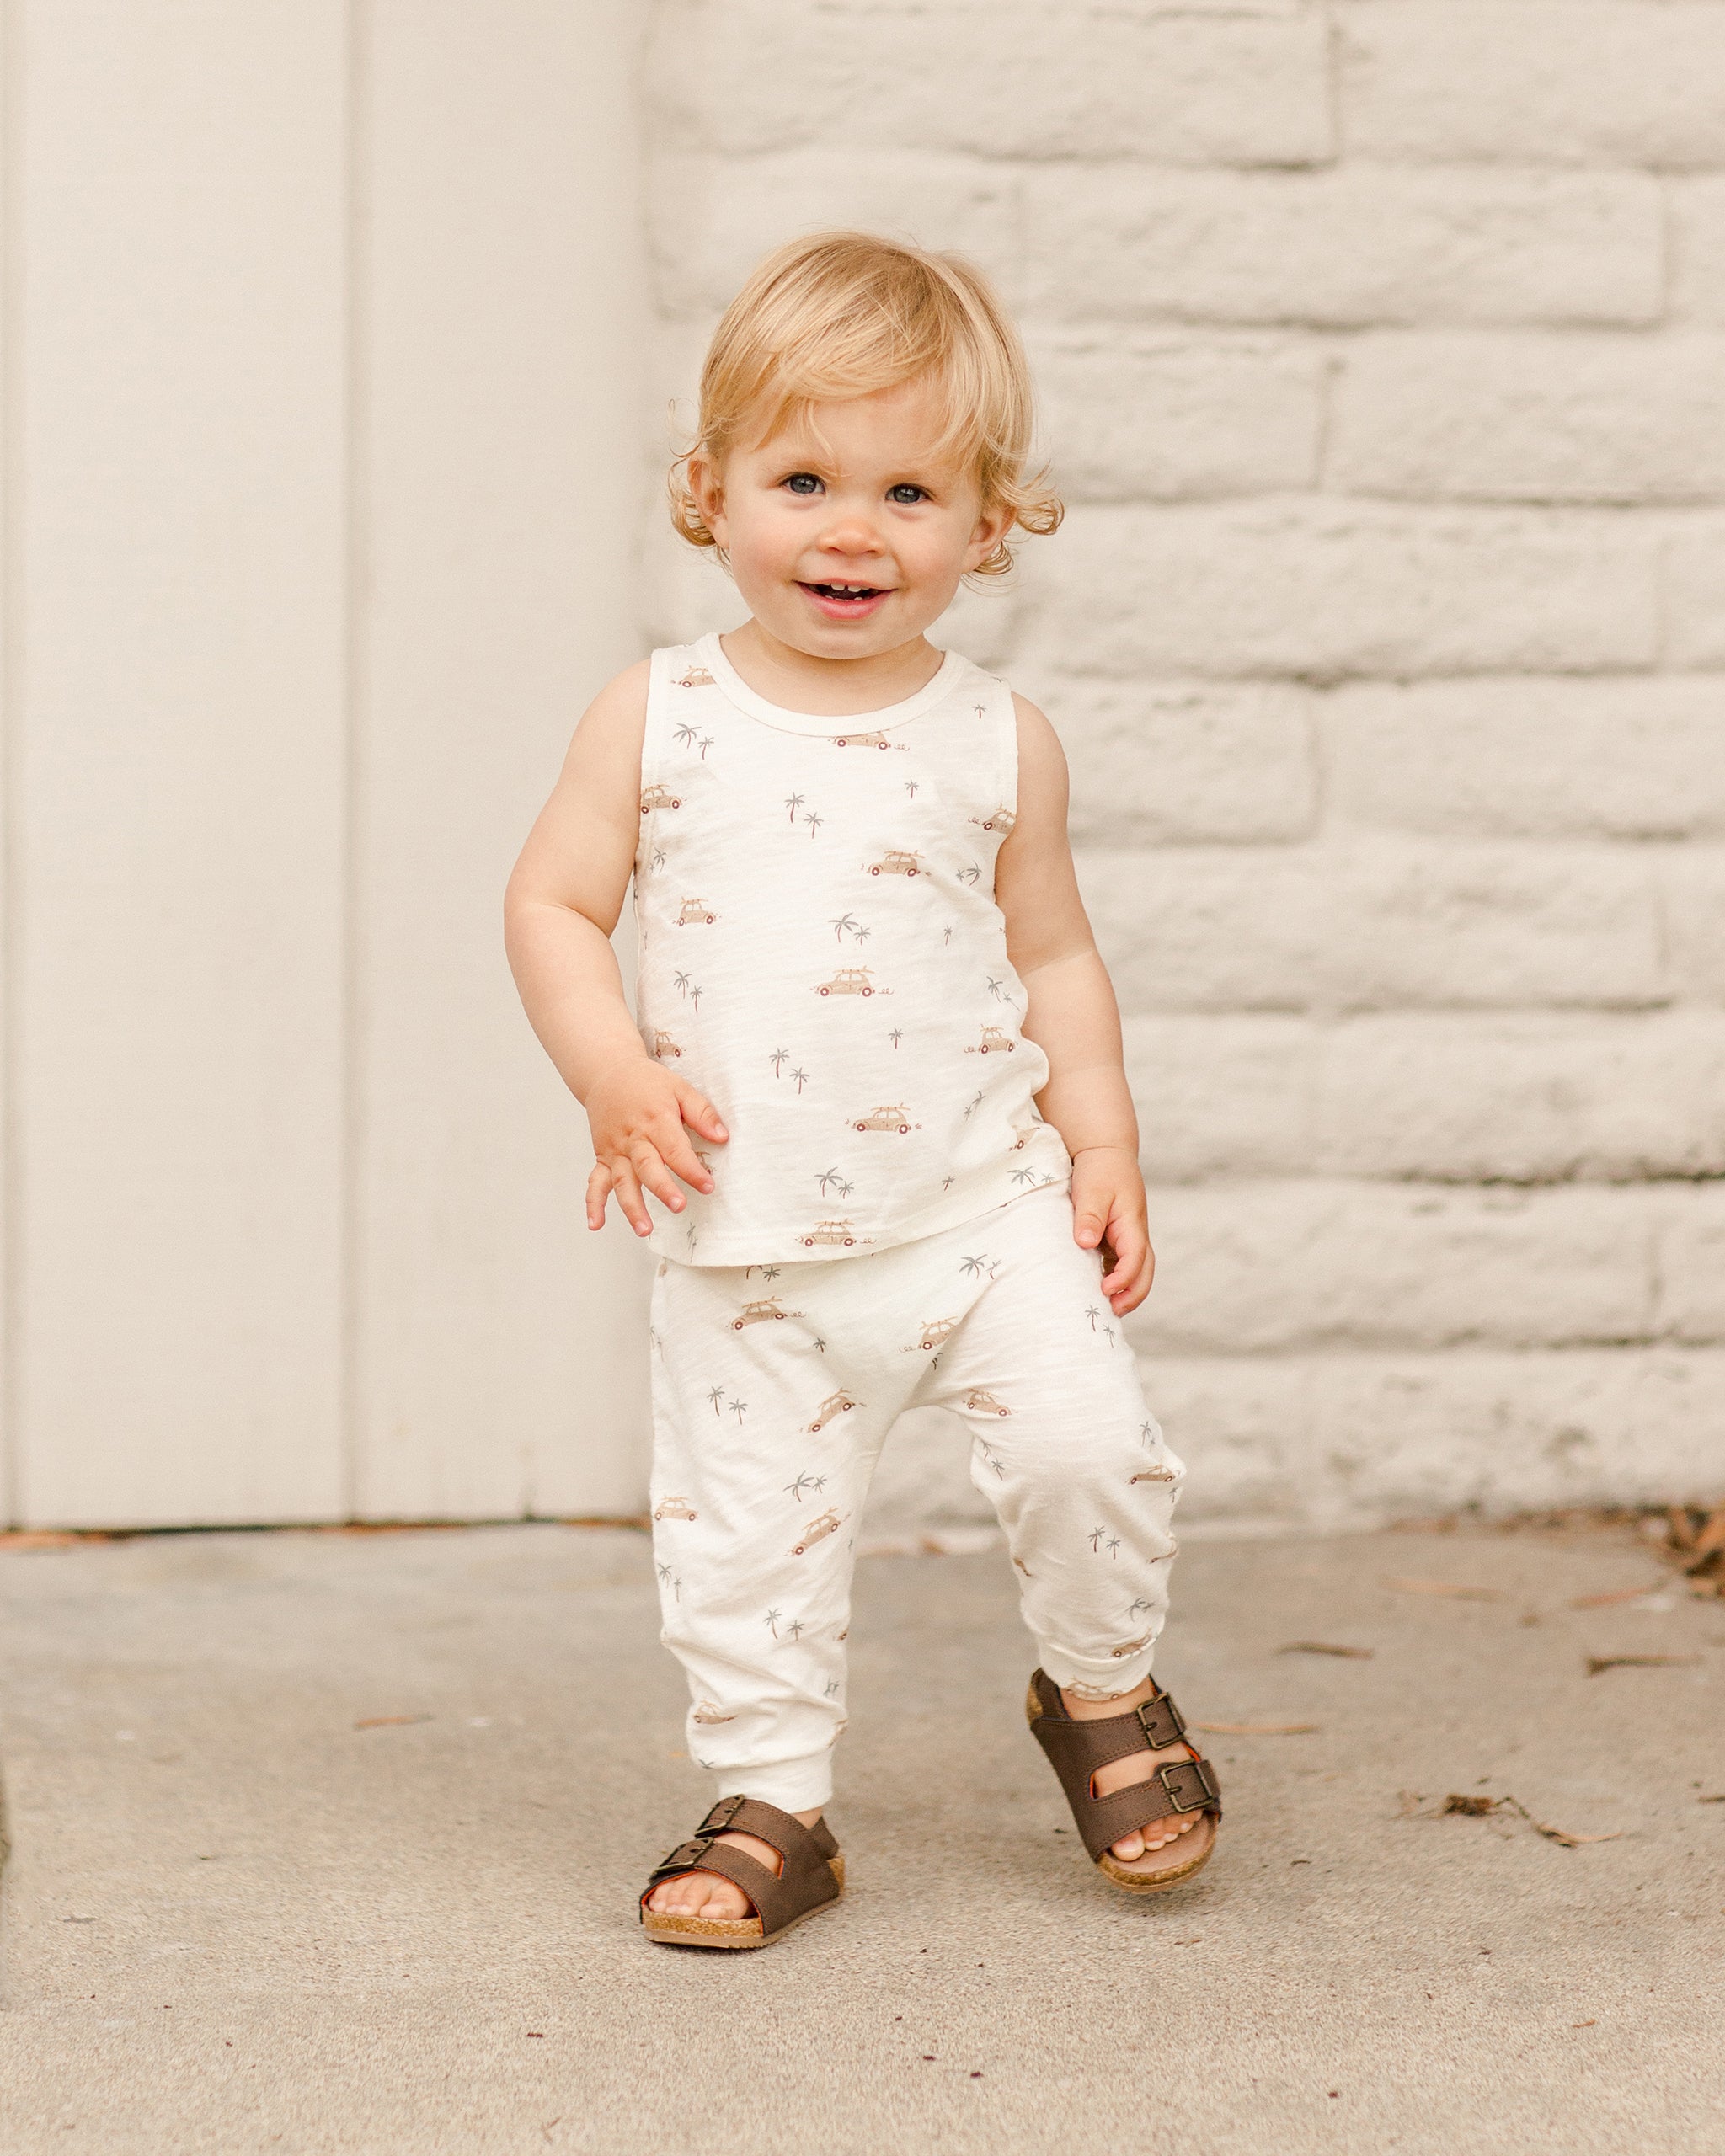 Tank + Slouch Pant Set || Surf Buggy - Rylee + Cru | Kids Clothes | Trendy Baby Clothes | Modern Infant Outfits |